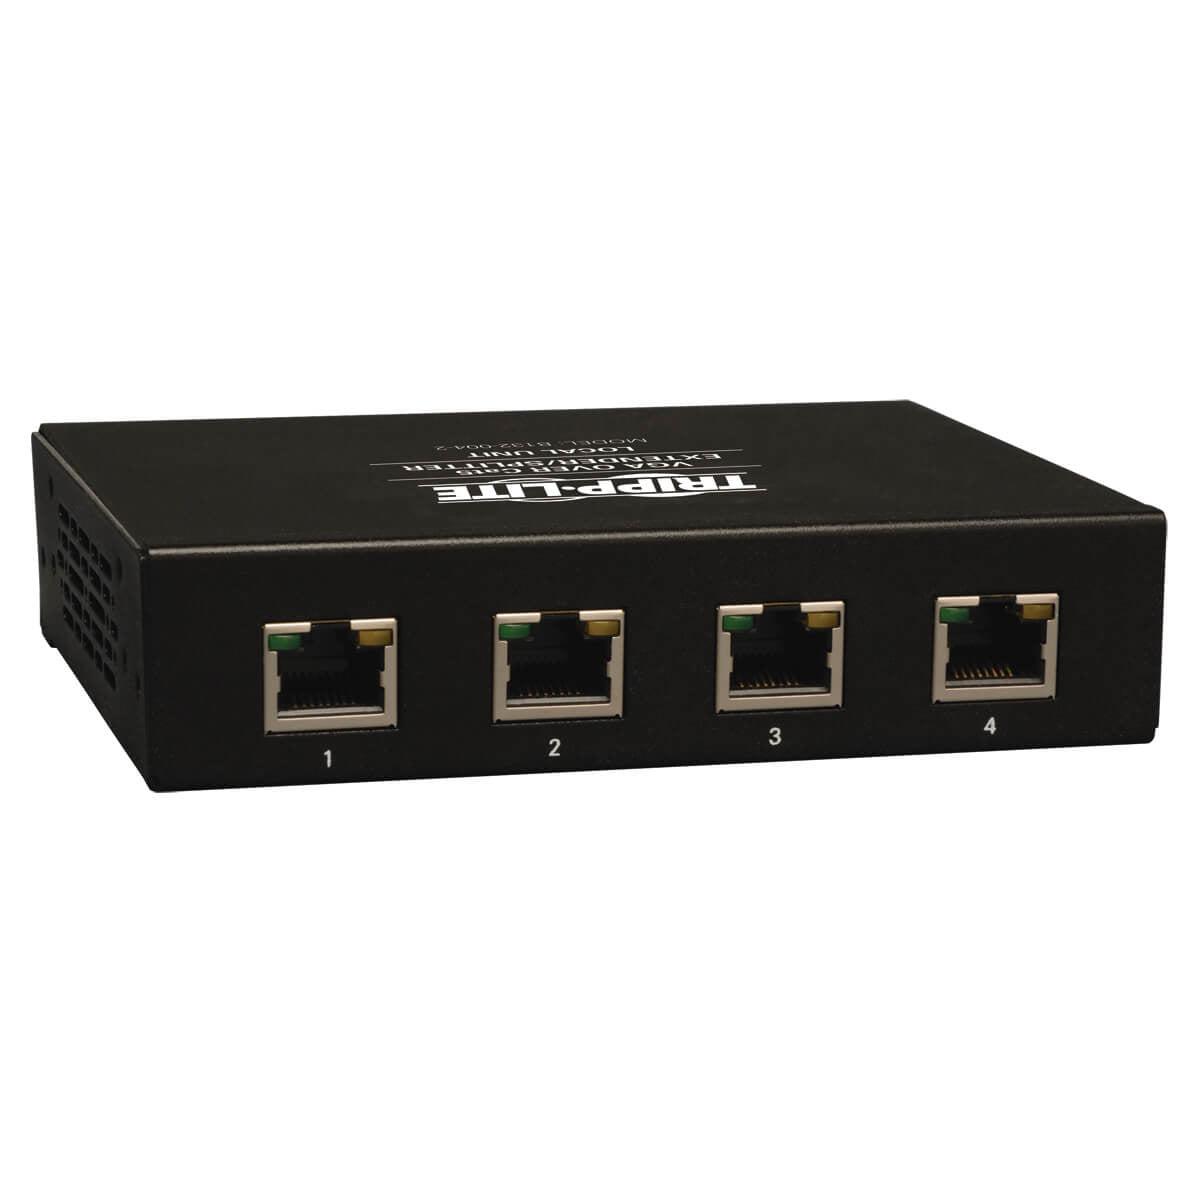 Tripp Lite 4-Port Vga Over Cat5/Cat6 Extender Splitter, Box-Style Transmitter With Edid, 1920X1440 At 60Hz, Up To 305 M (1,000-Ft.)